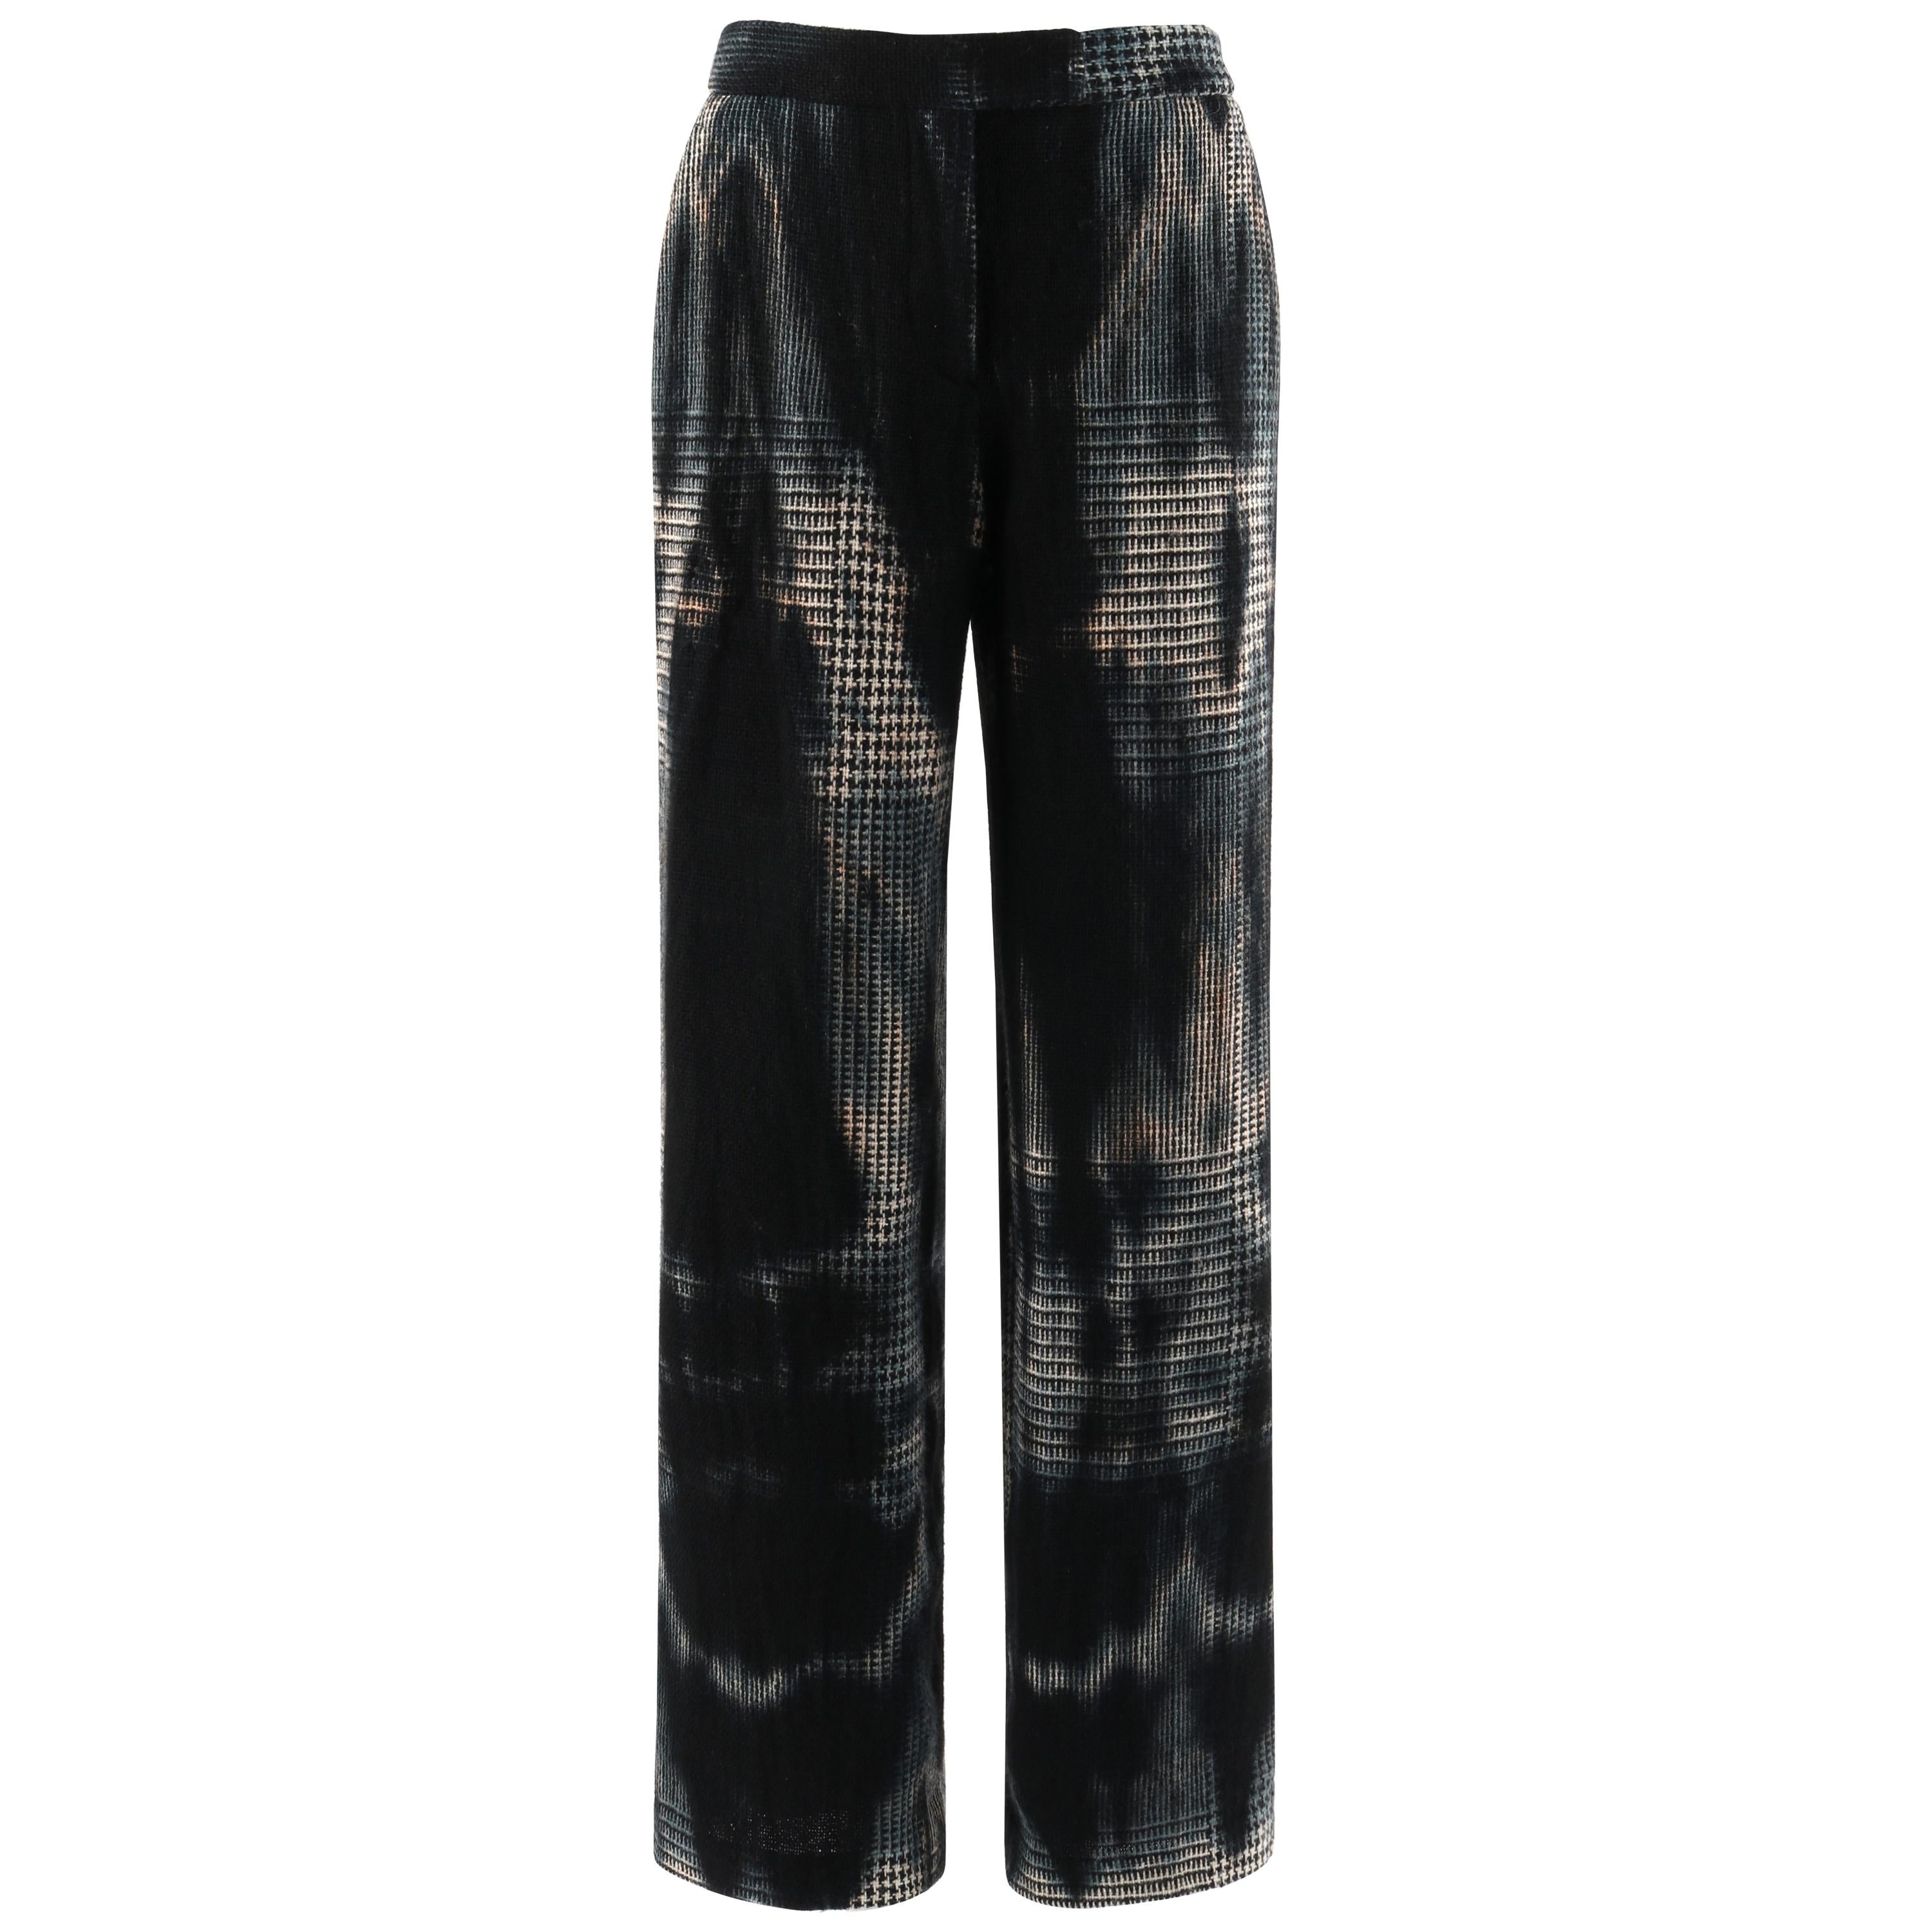 ALEXANDER McQUEEN F/W 2001 "What a Merry-Go-Round" Smoke Houndstooth Knit Pants